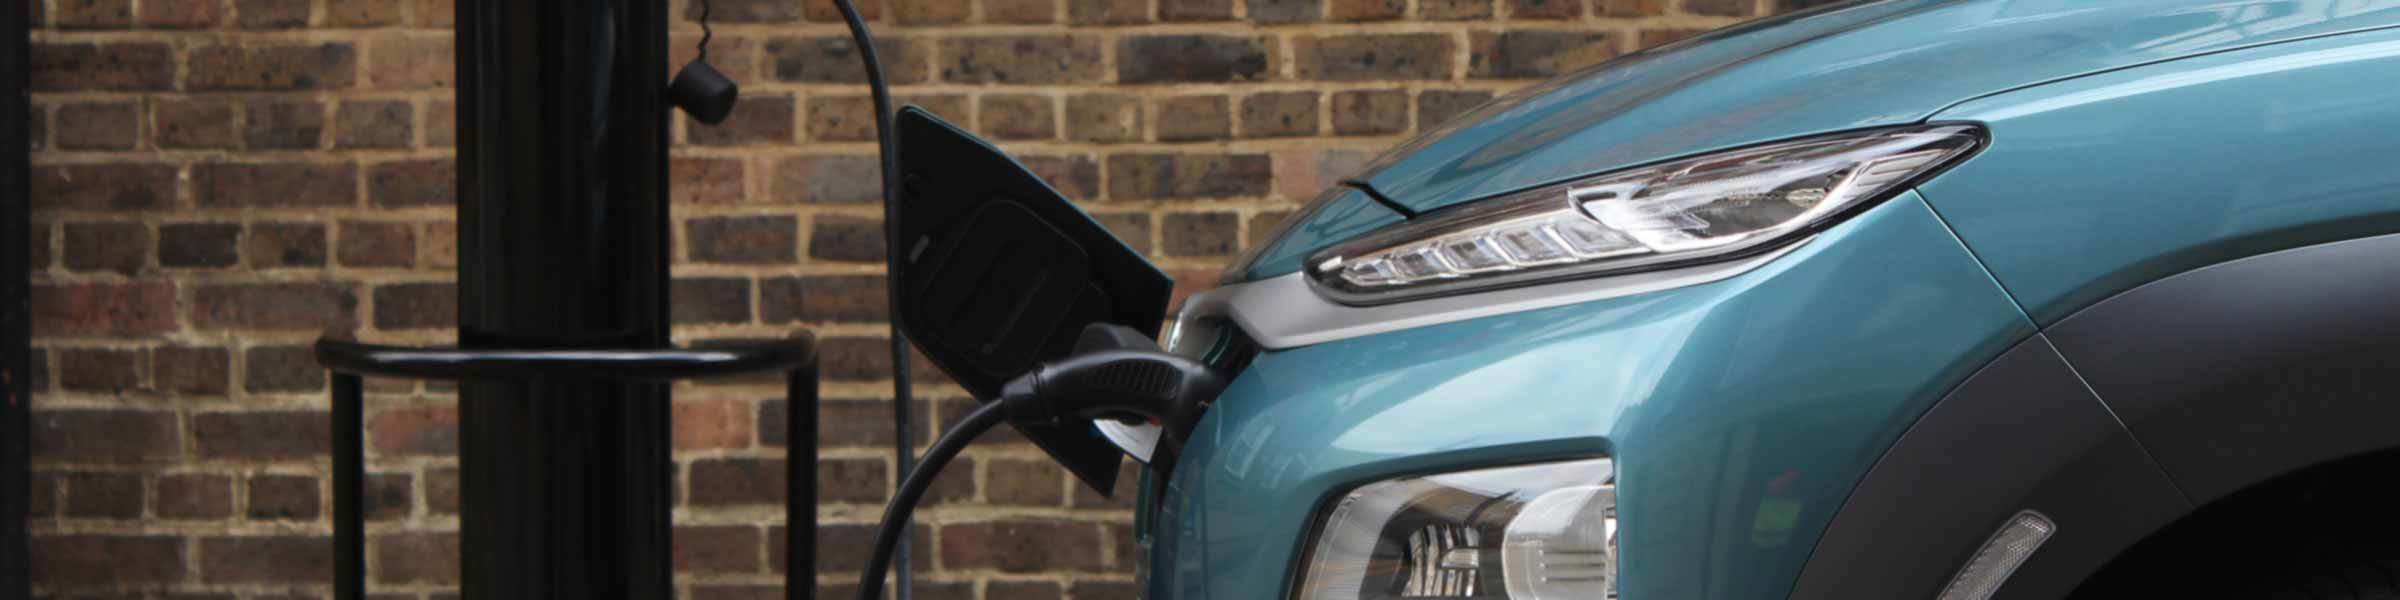 4 tips for driving your EV in the cold